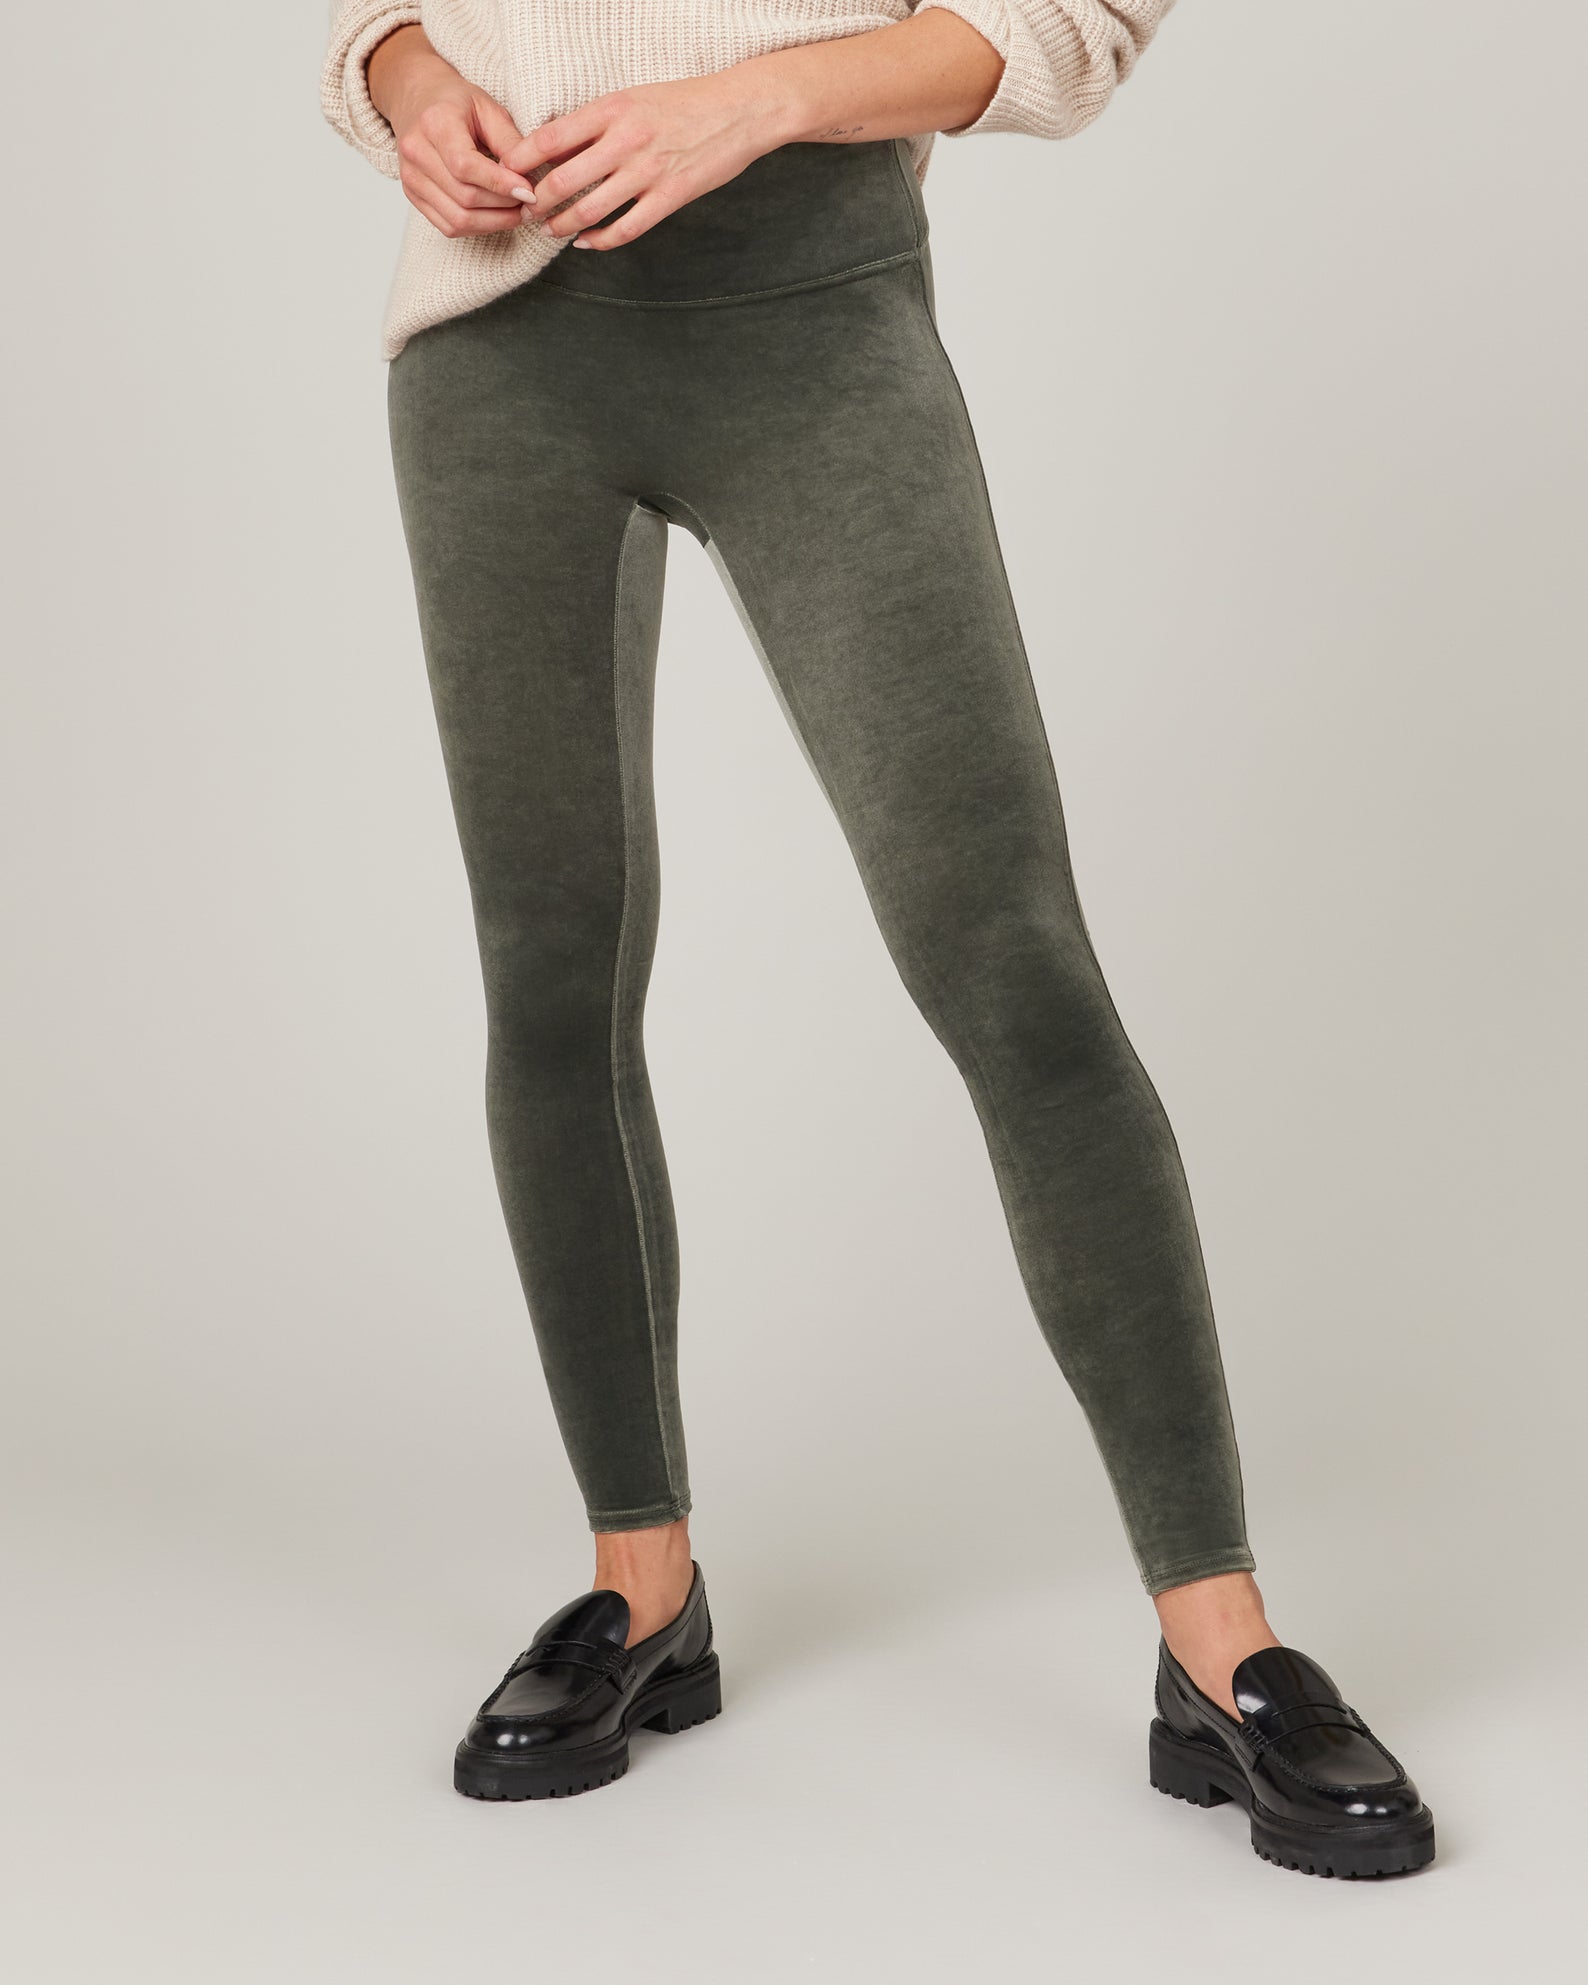 The 100 Style — What: Aritzia Wilfred Free Daria Pant – Ankle